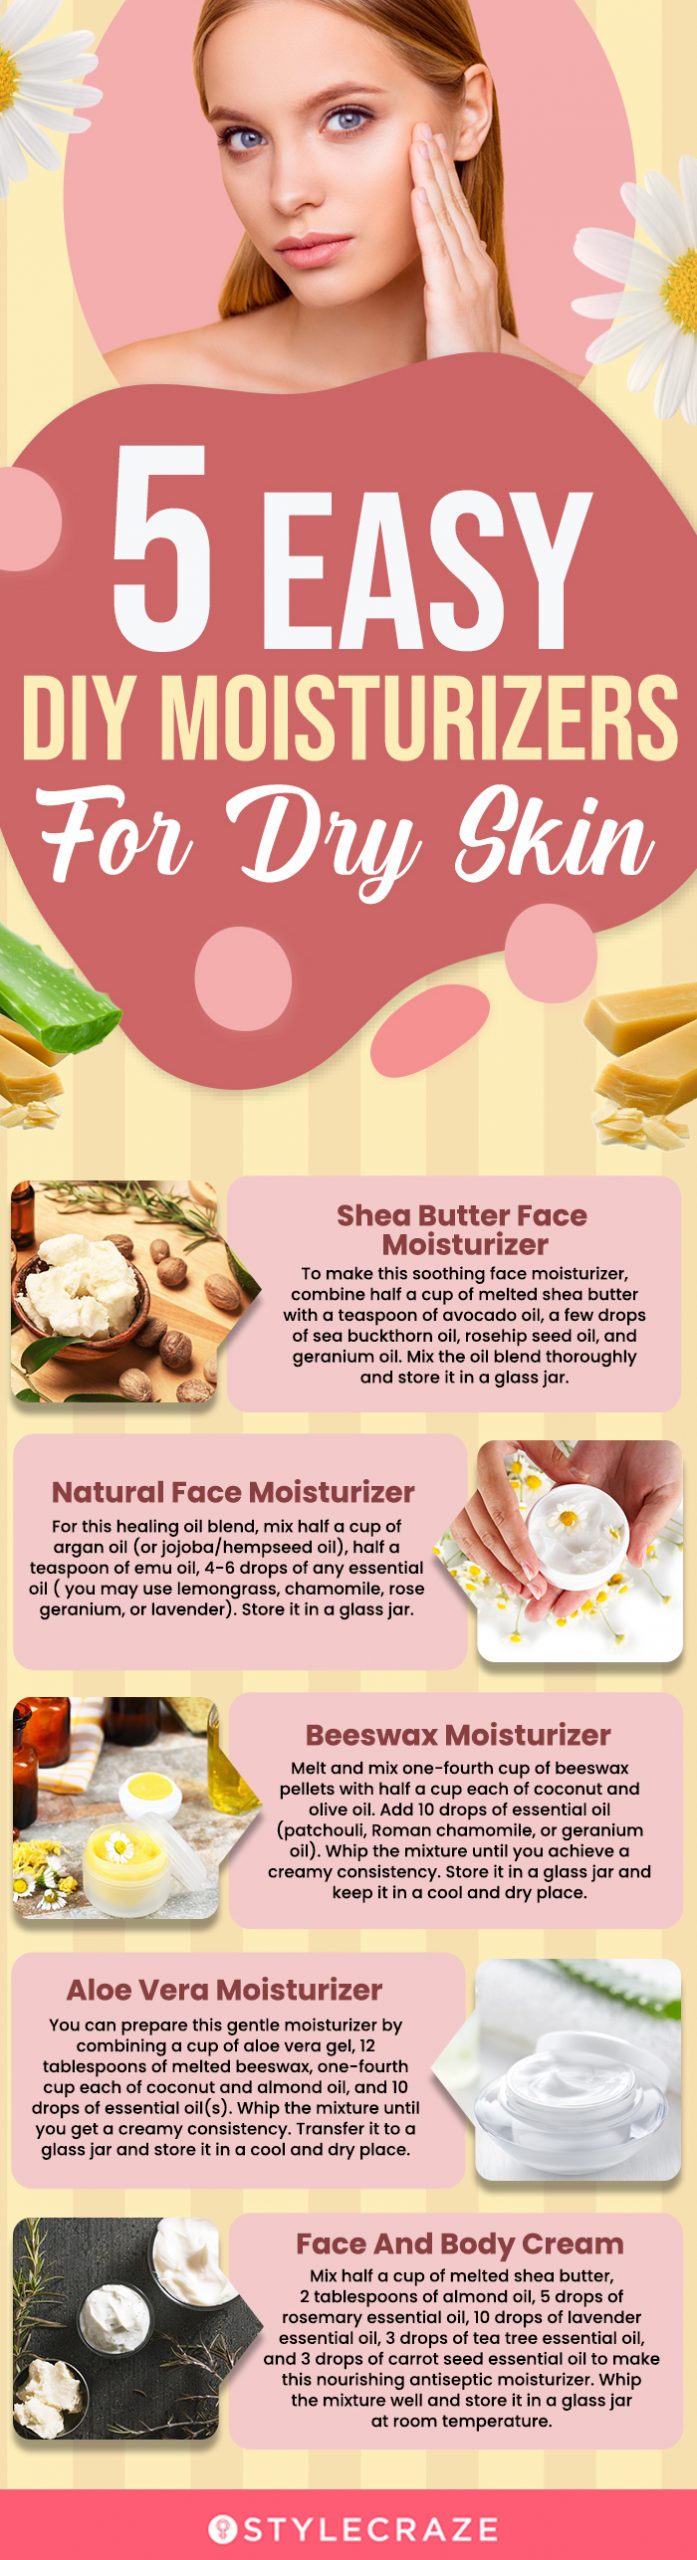 5 easy diy moisturizers for dry skin (infographic)